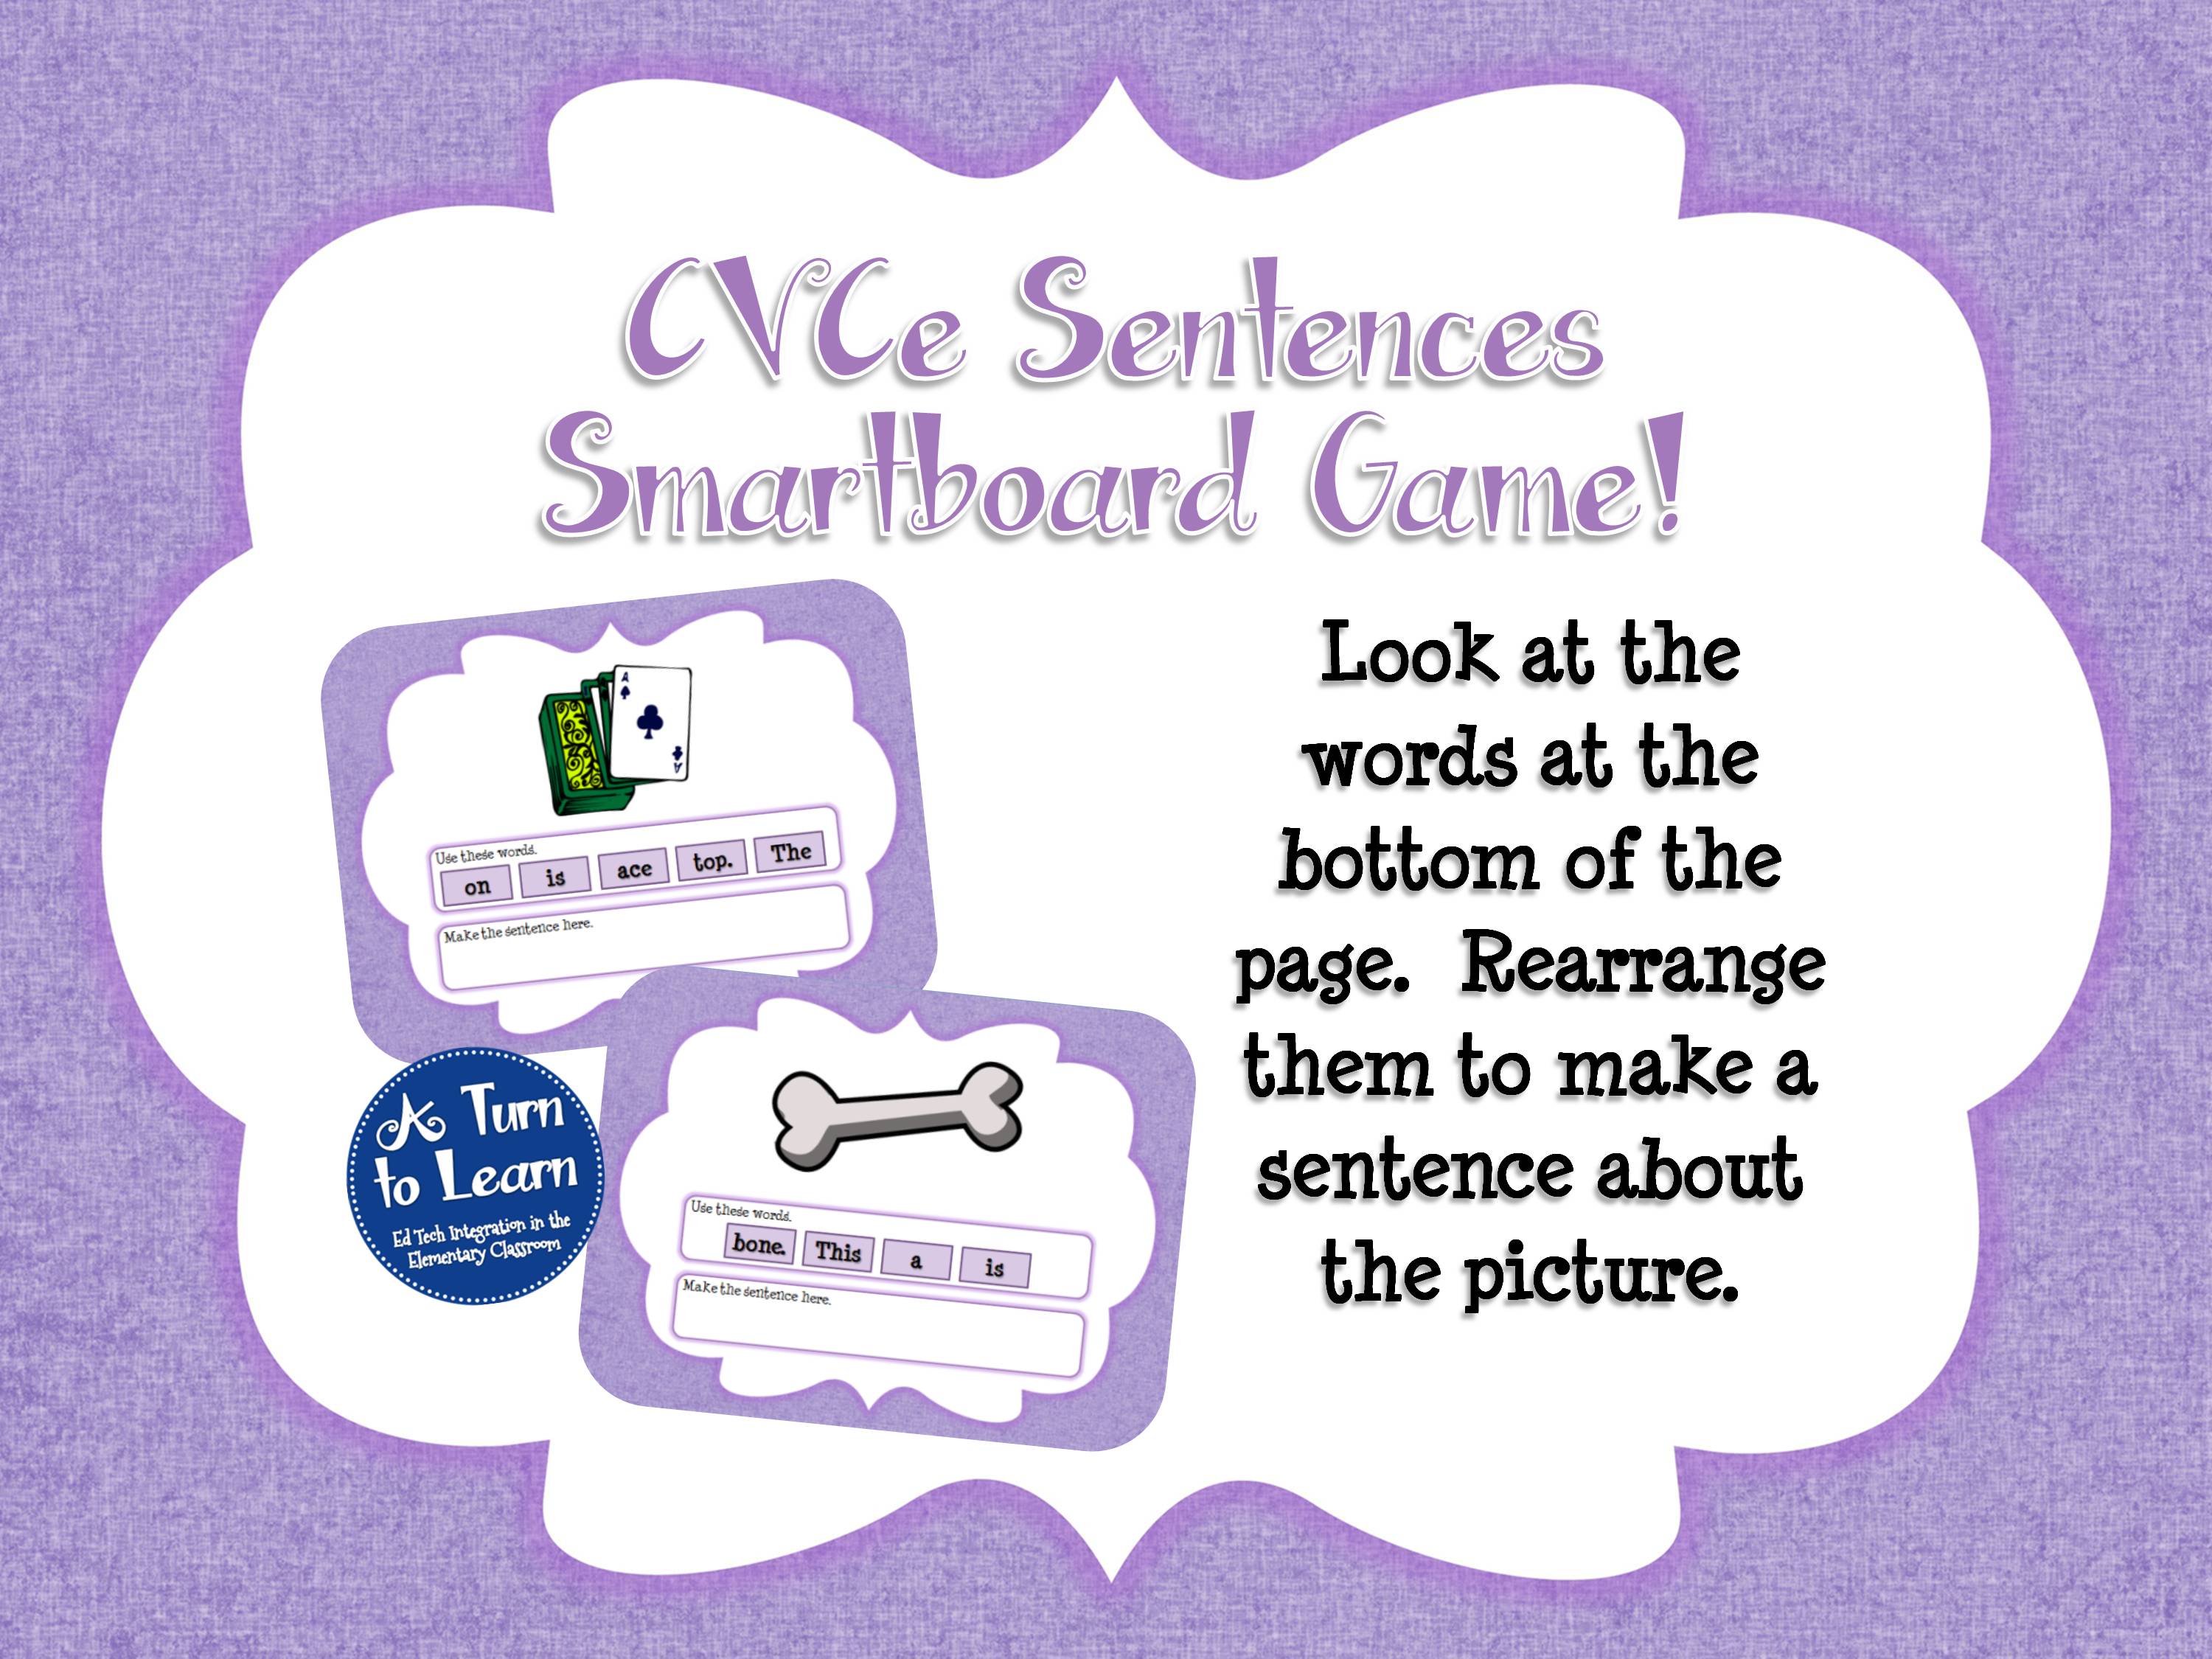 CVCe Smartboard Game - Grammar and sentence structure with CVCe words